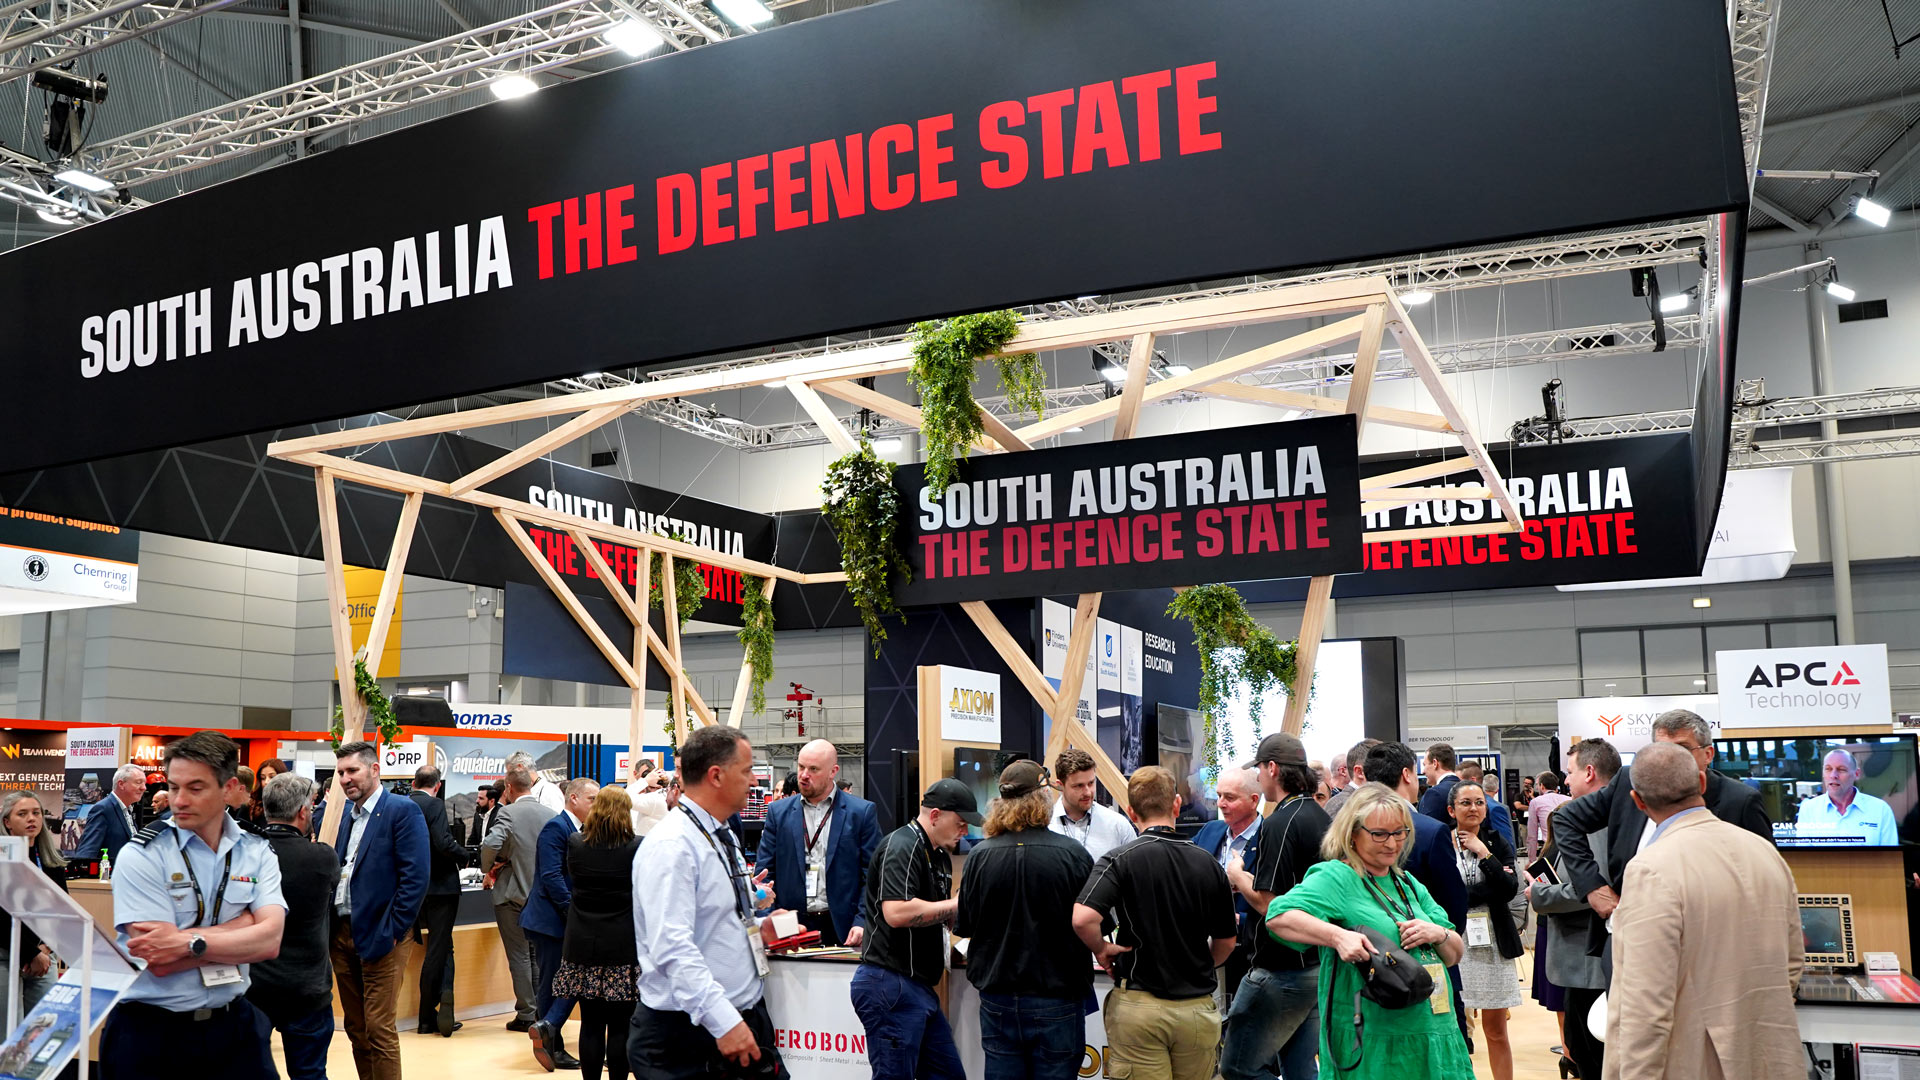 Delegates at the South Australia - The Defence State stand at Land Forces 2022 in Brisbane